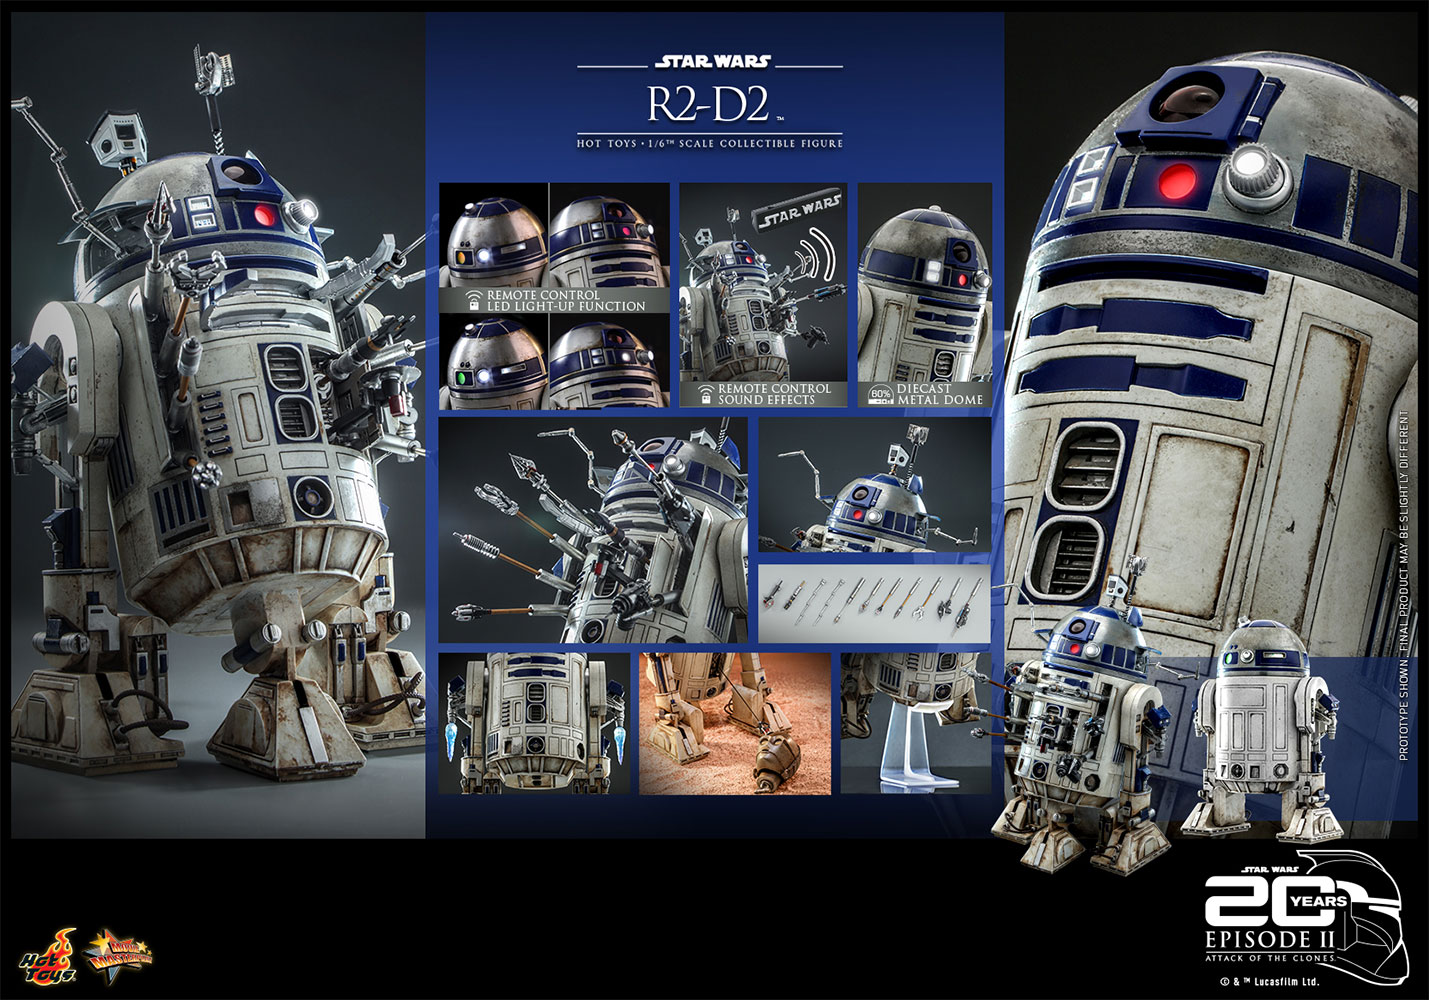 [Pre-Order] Episode II Attack of the Clones - R2-D2 Sixth Scale Figure